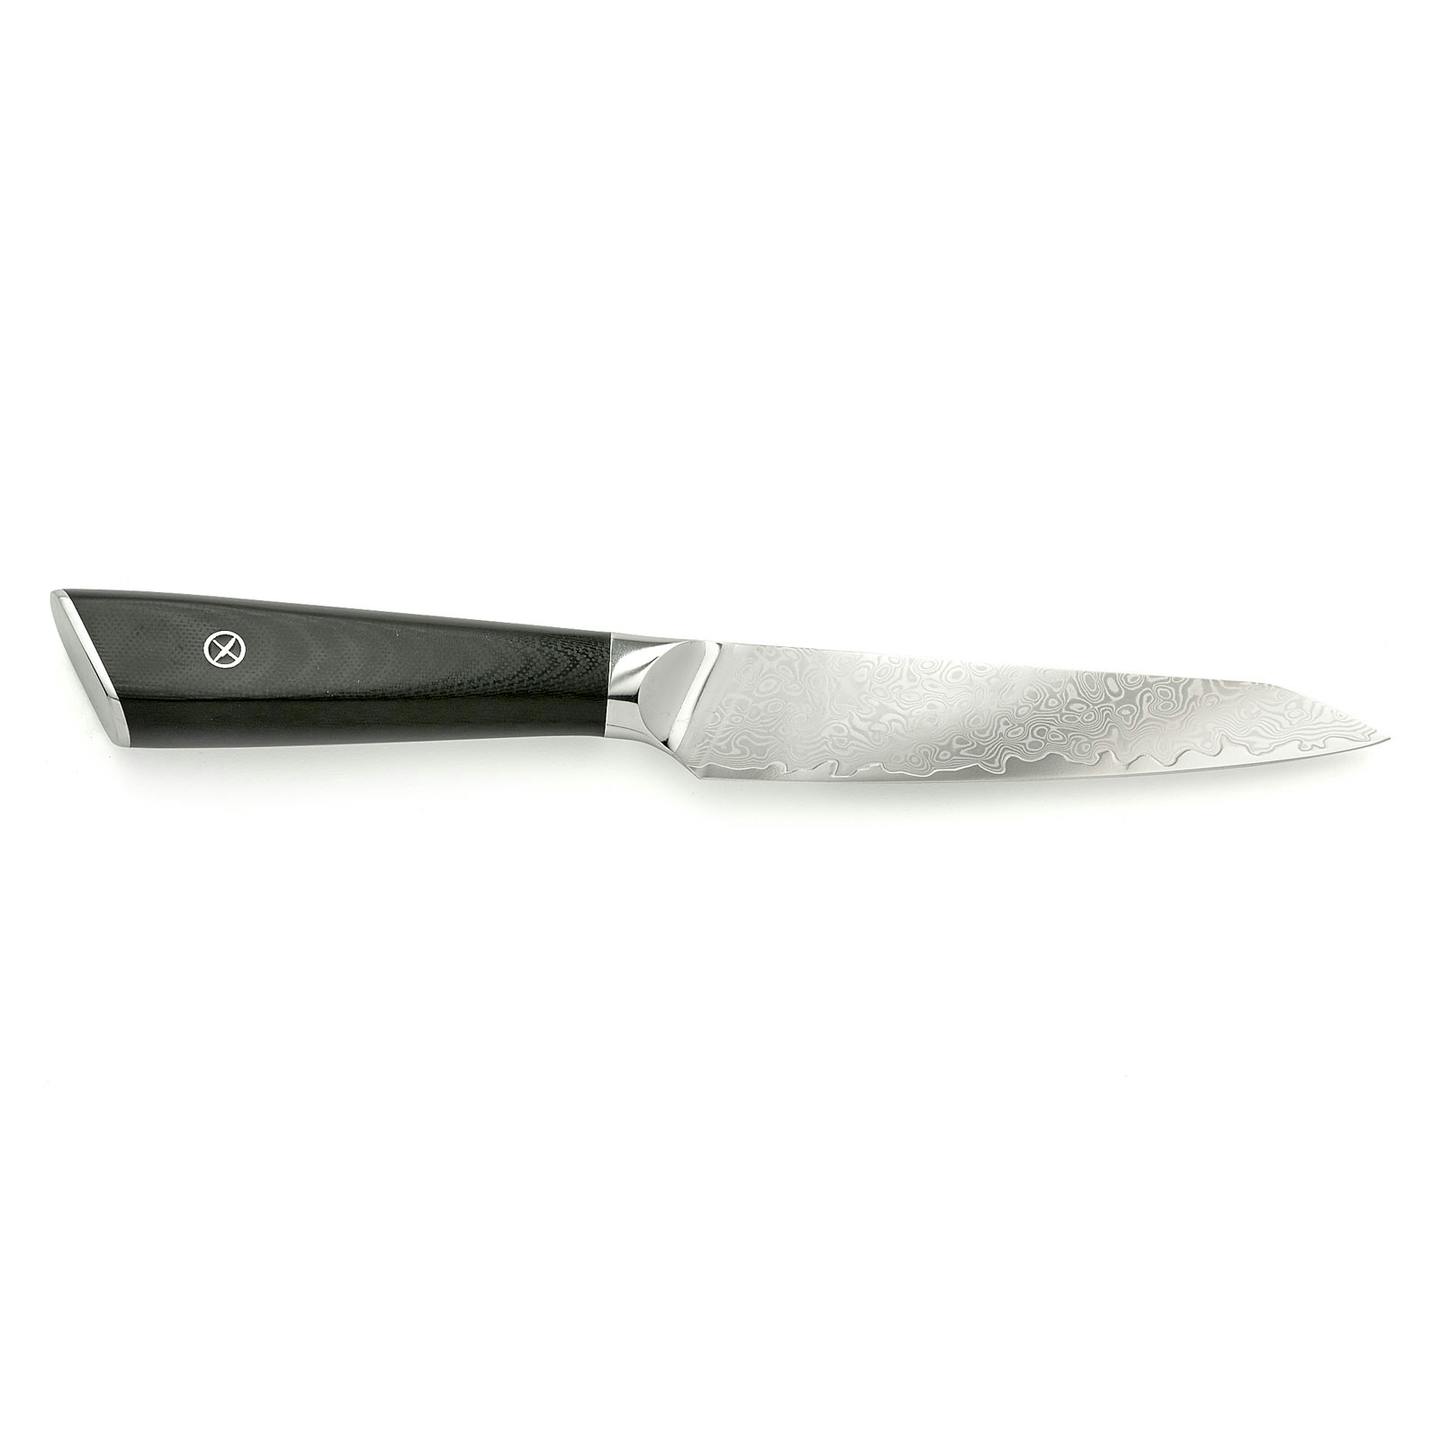 Mercer Culinary Damascus 5 Utility Knife with G10 Handle M13790